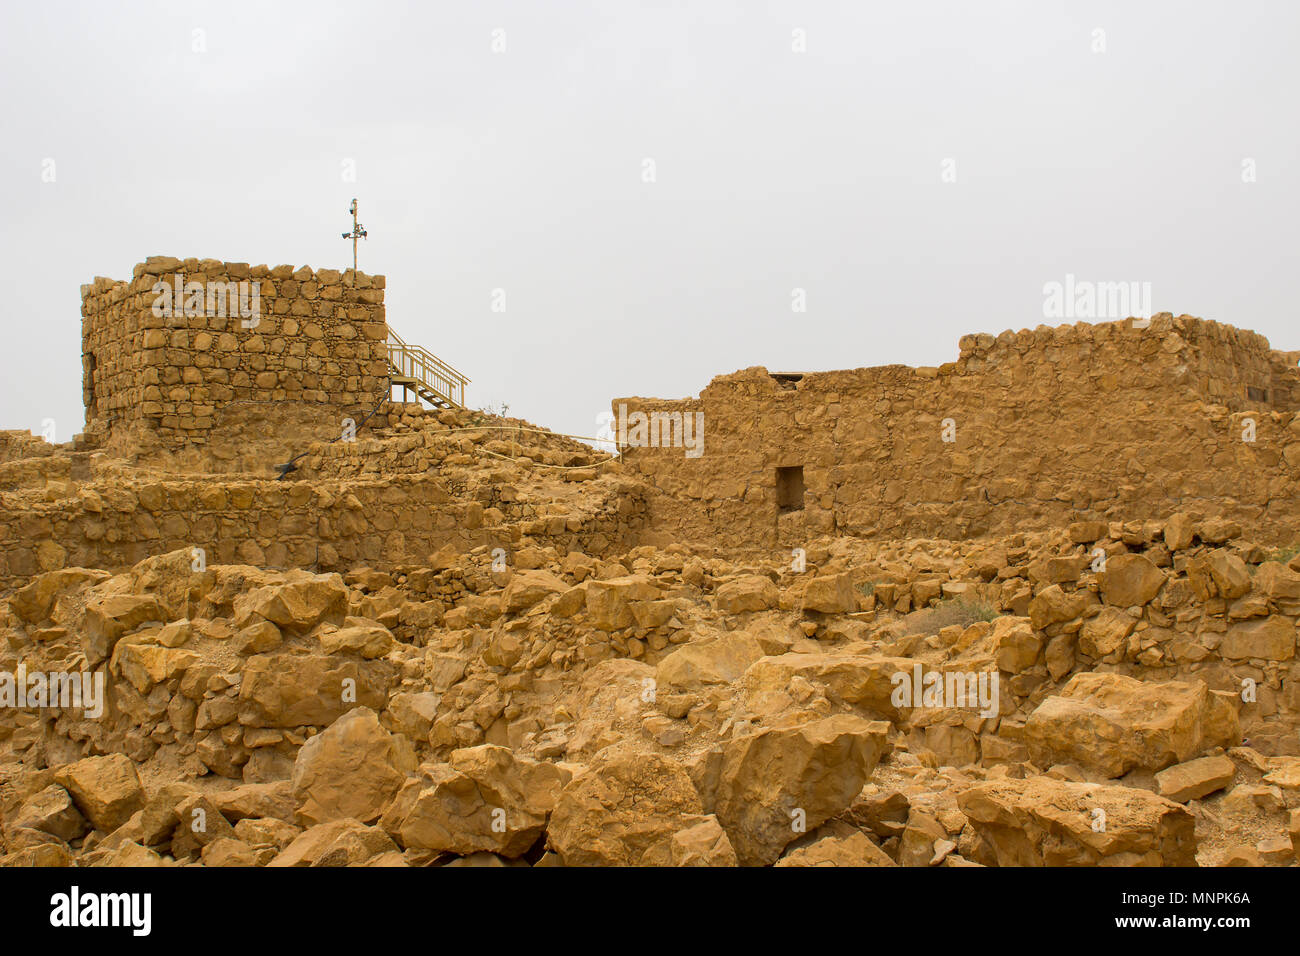 Some of the reconstructed ruins of the ancient Jewish clifftop fortress of Masada in Southern Israel.  This was the scene of an historic mass suicide. Stock Photo